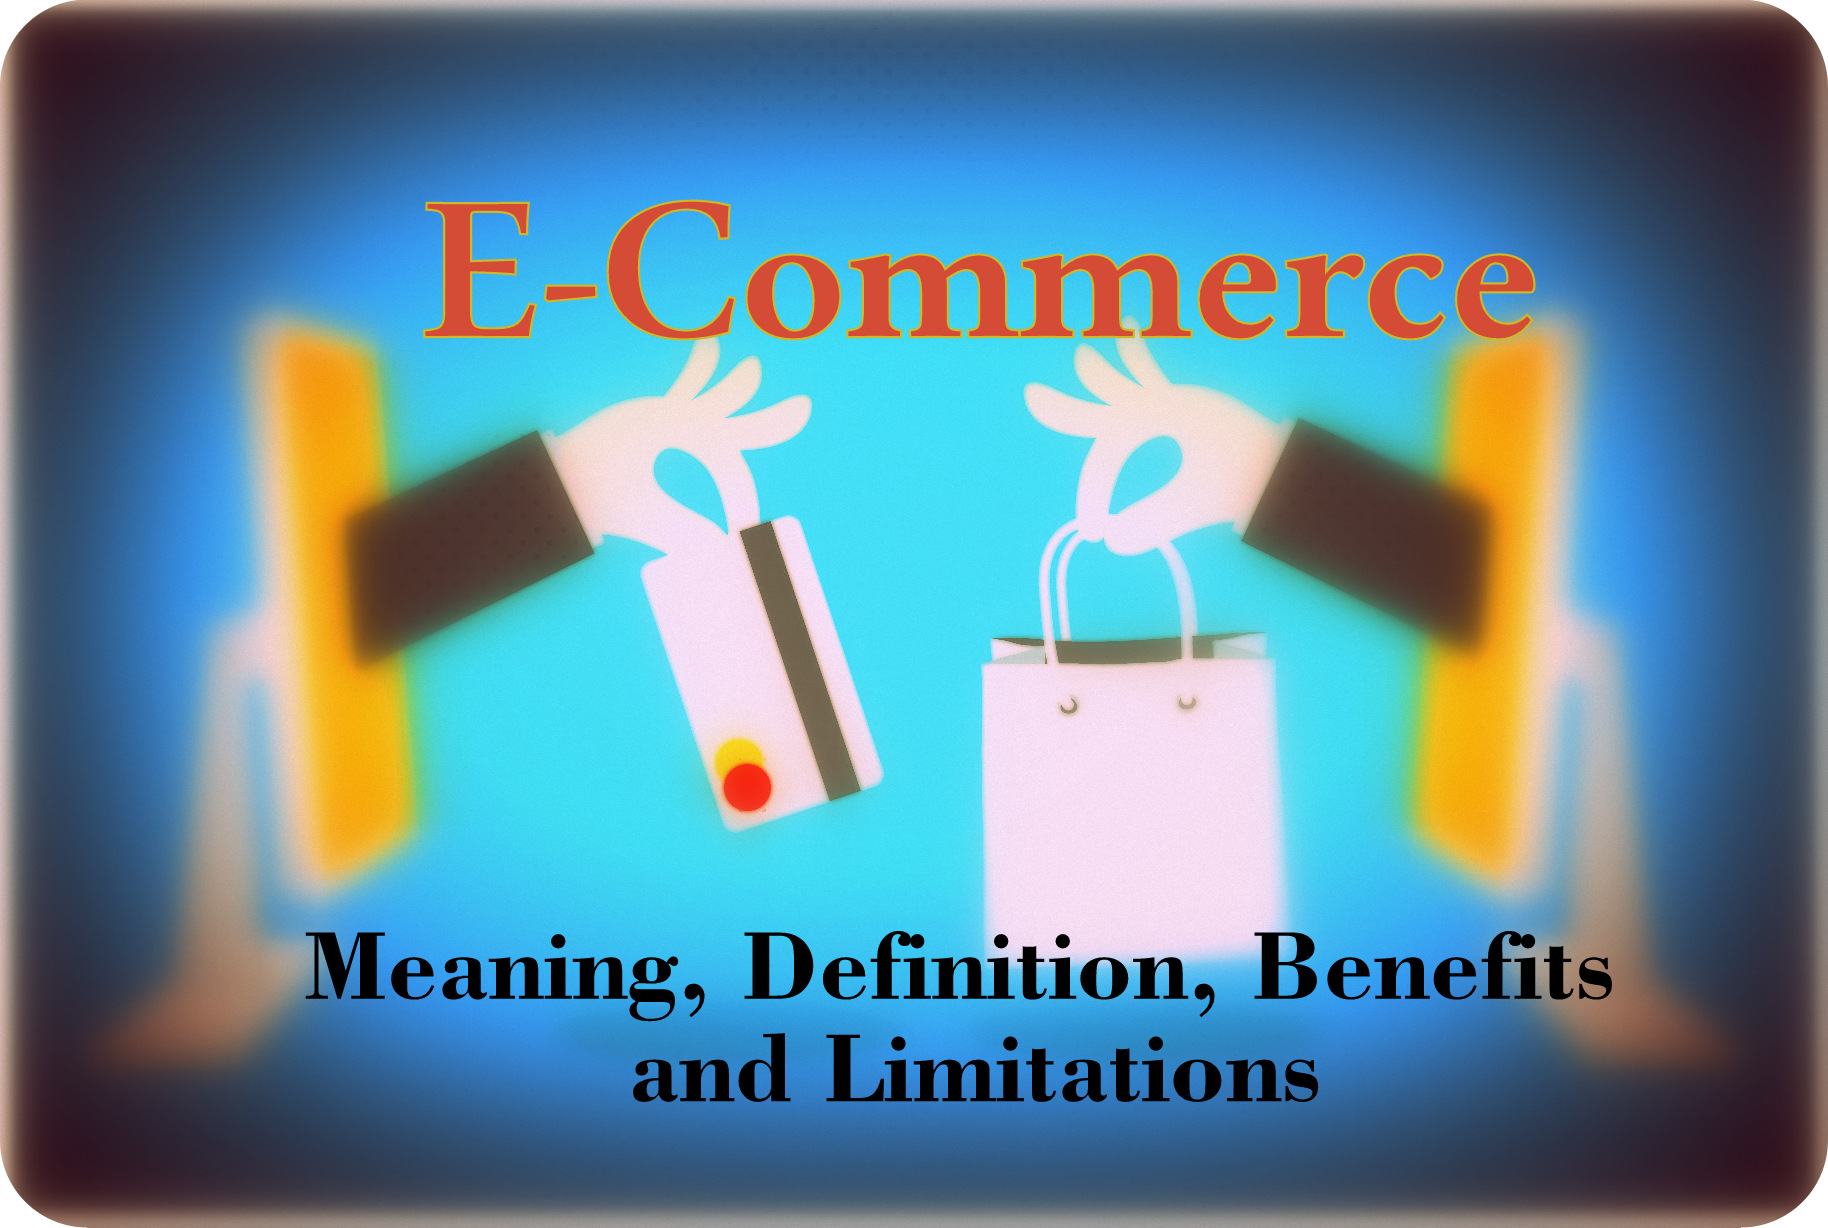 Electronic Commerce - Meaning, Definition, Benefits and Limitations